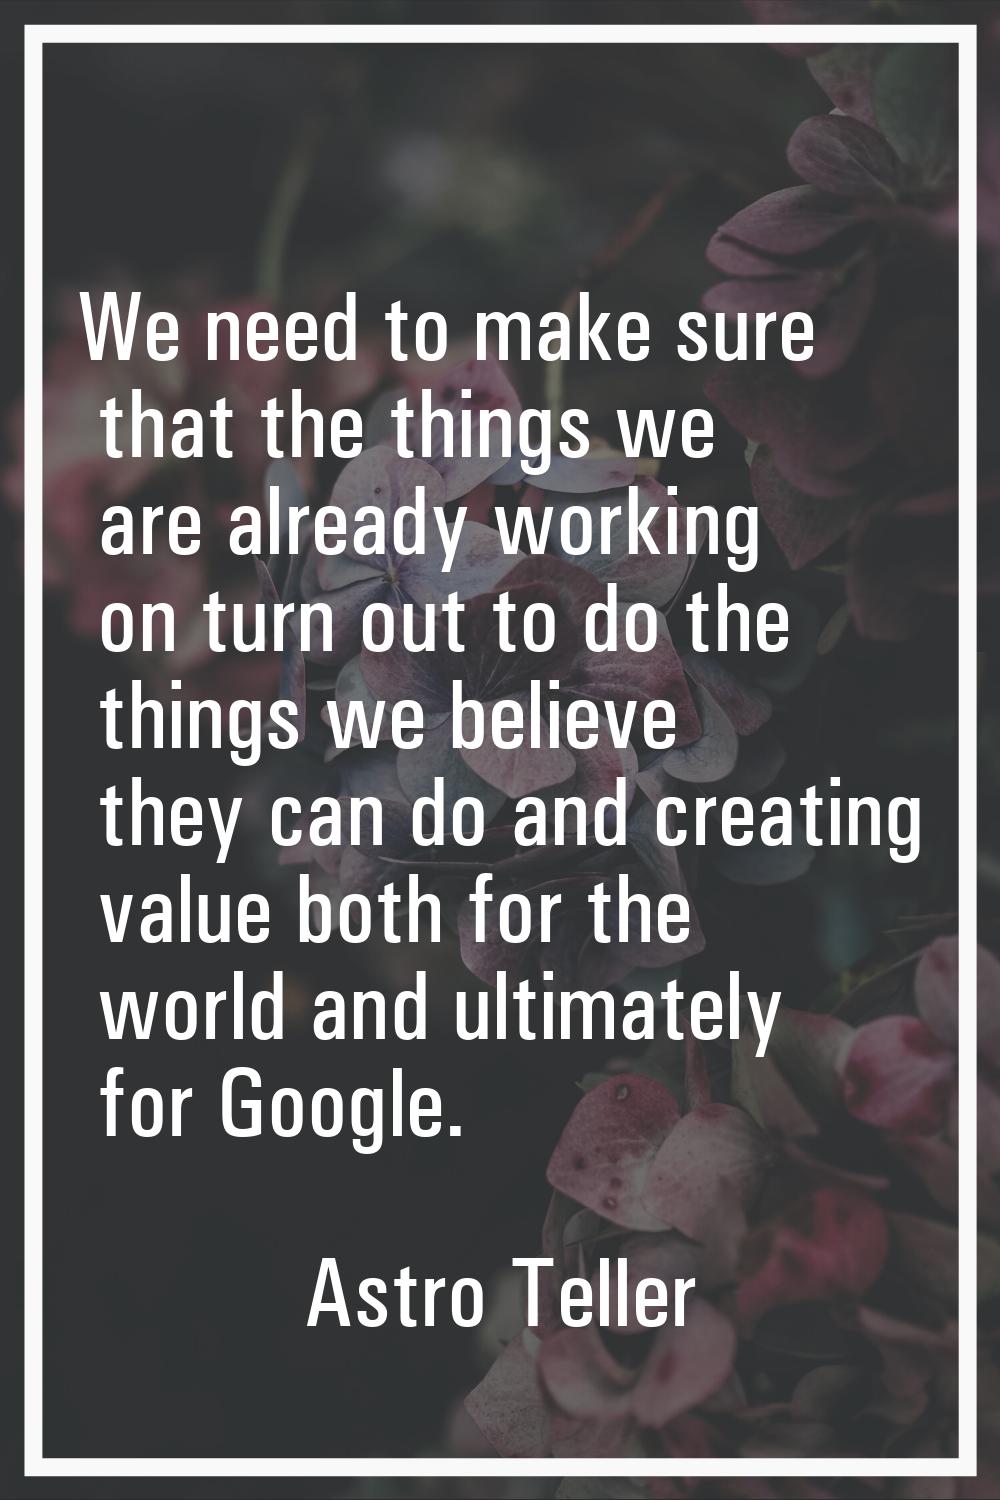 We need to make sure that the things we are already working on turn out to do the things we believe